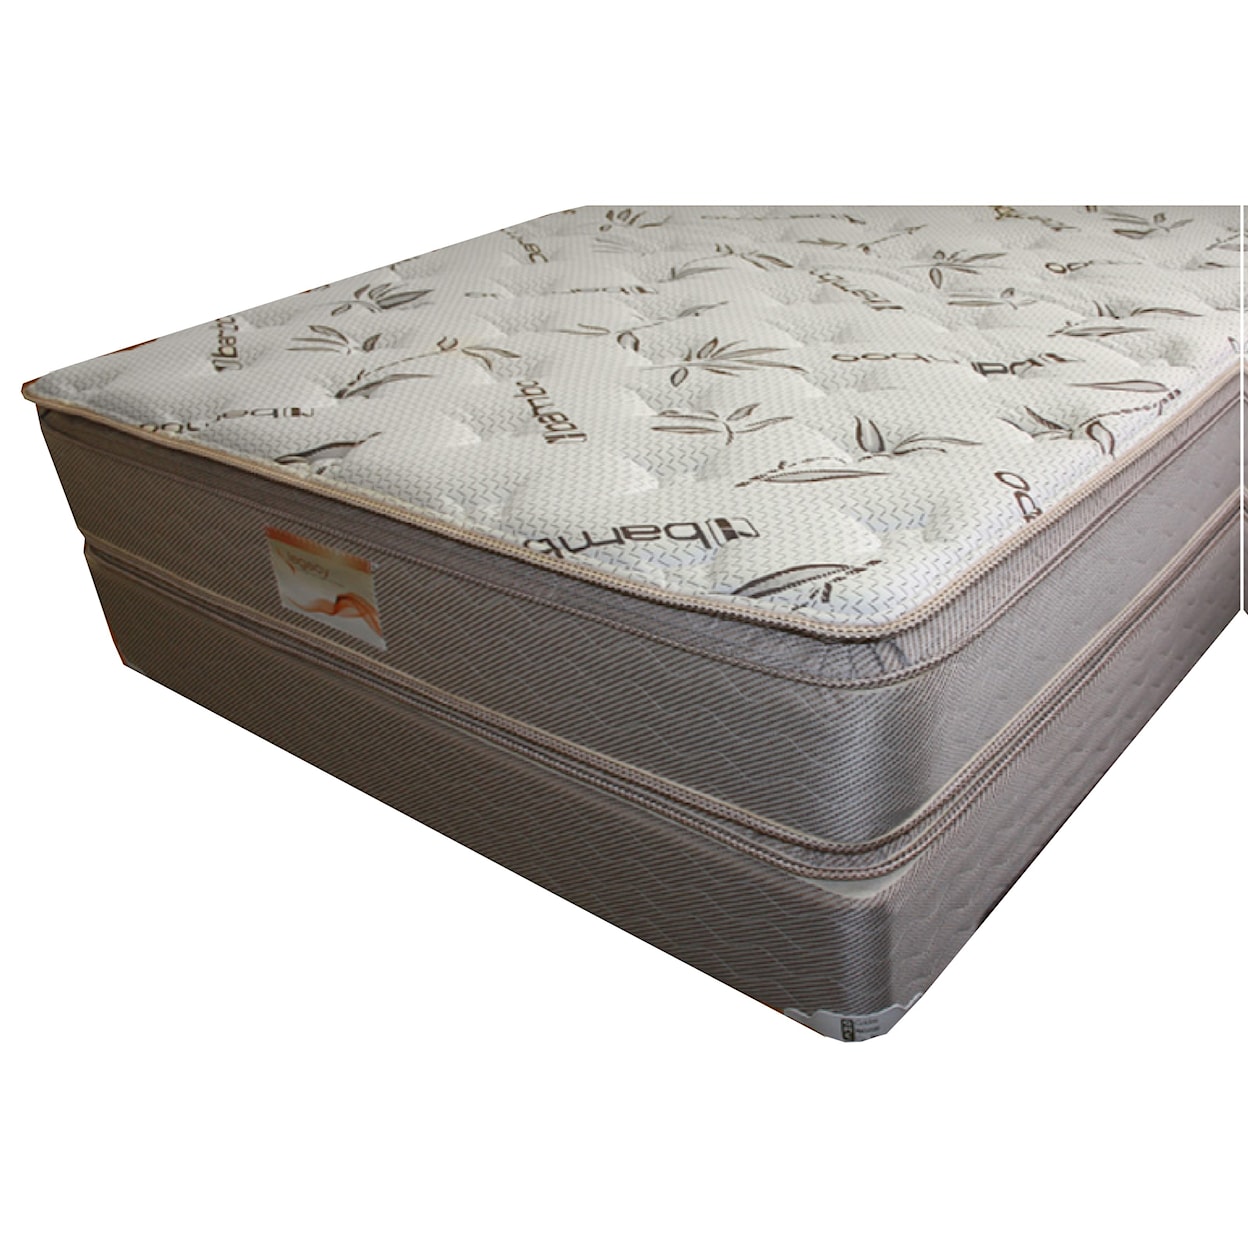 Golden Mattress Company Legacy IV Double Sided PT Queen Two Sided Pillow Top Mattress Set